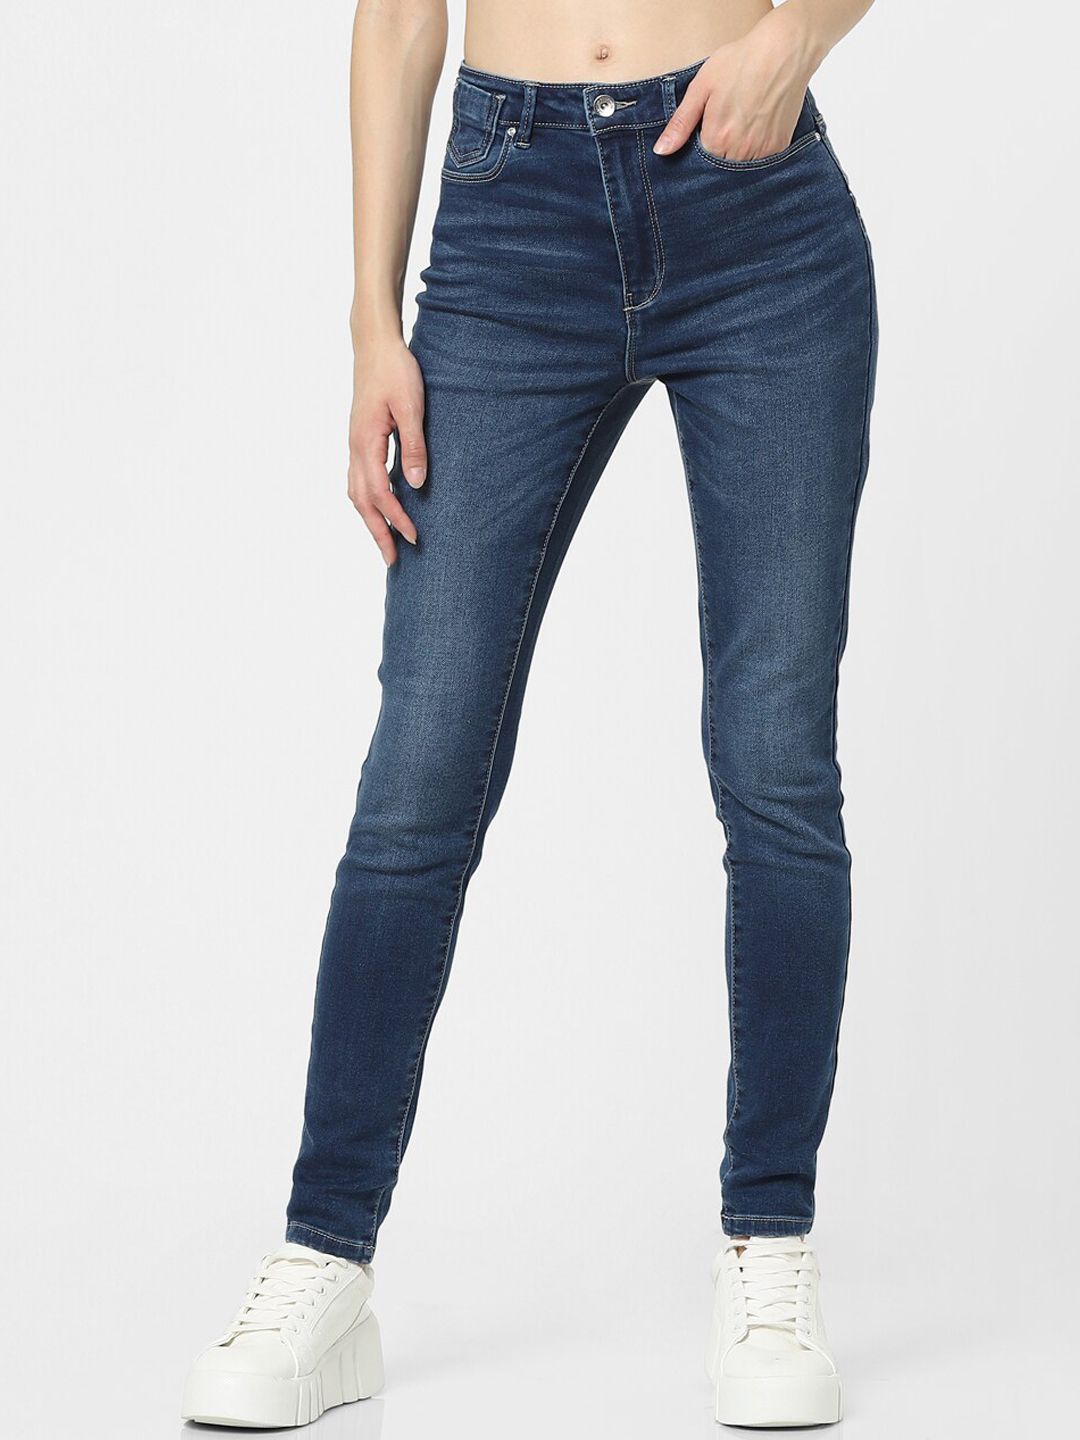 ONLY Women Blue High-Rise Stretchable Jeans Price in India